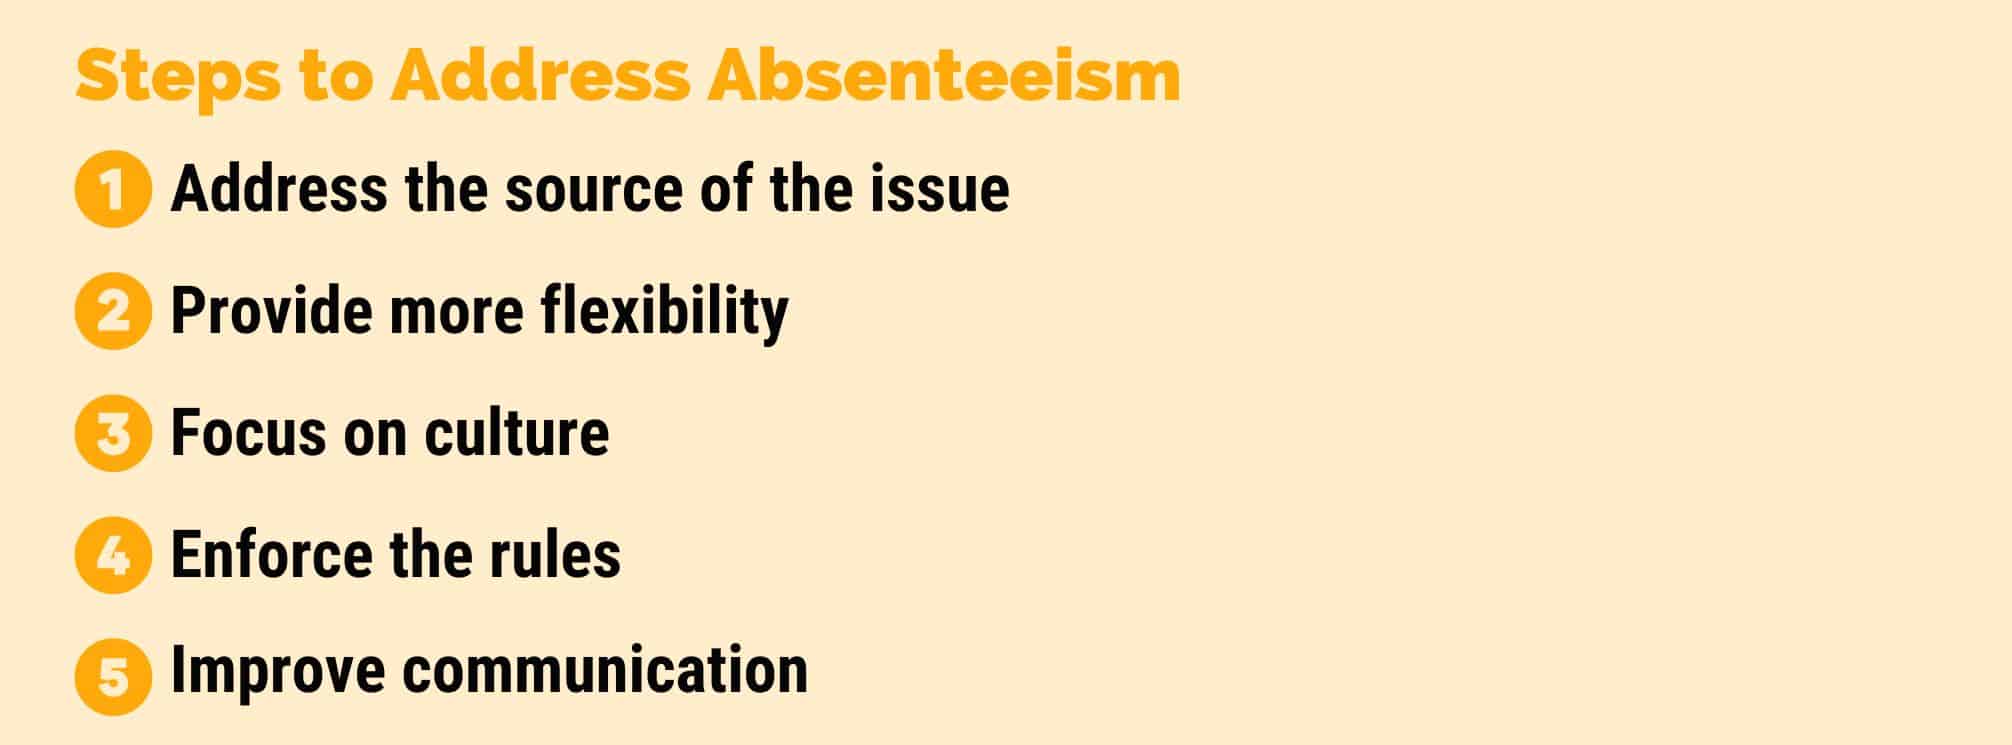 text graphic that says "steps to address absenteeism" with a list of steps from the blog